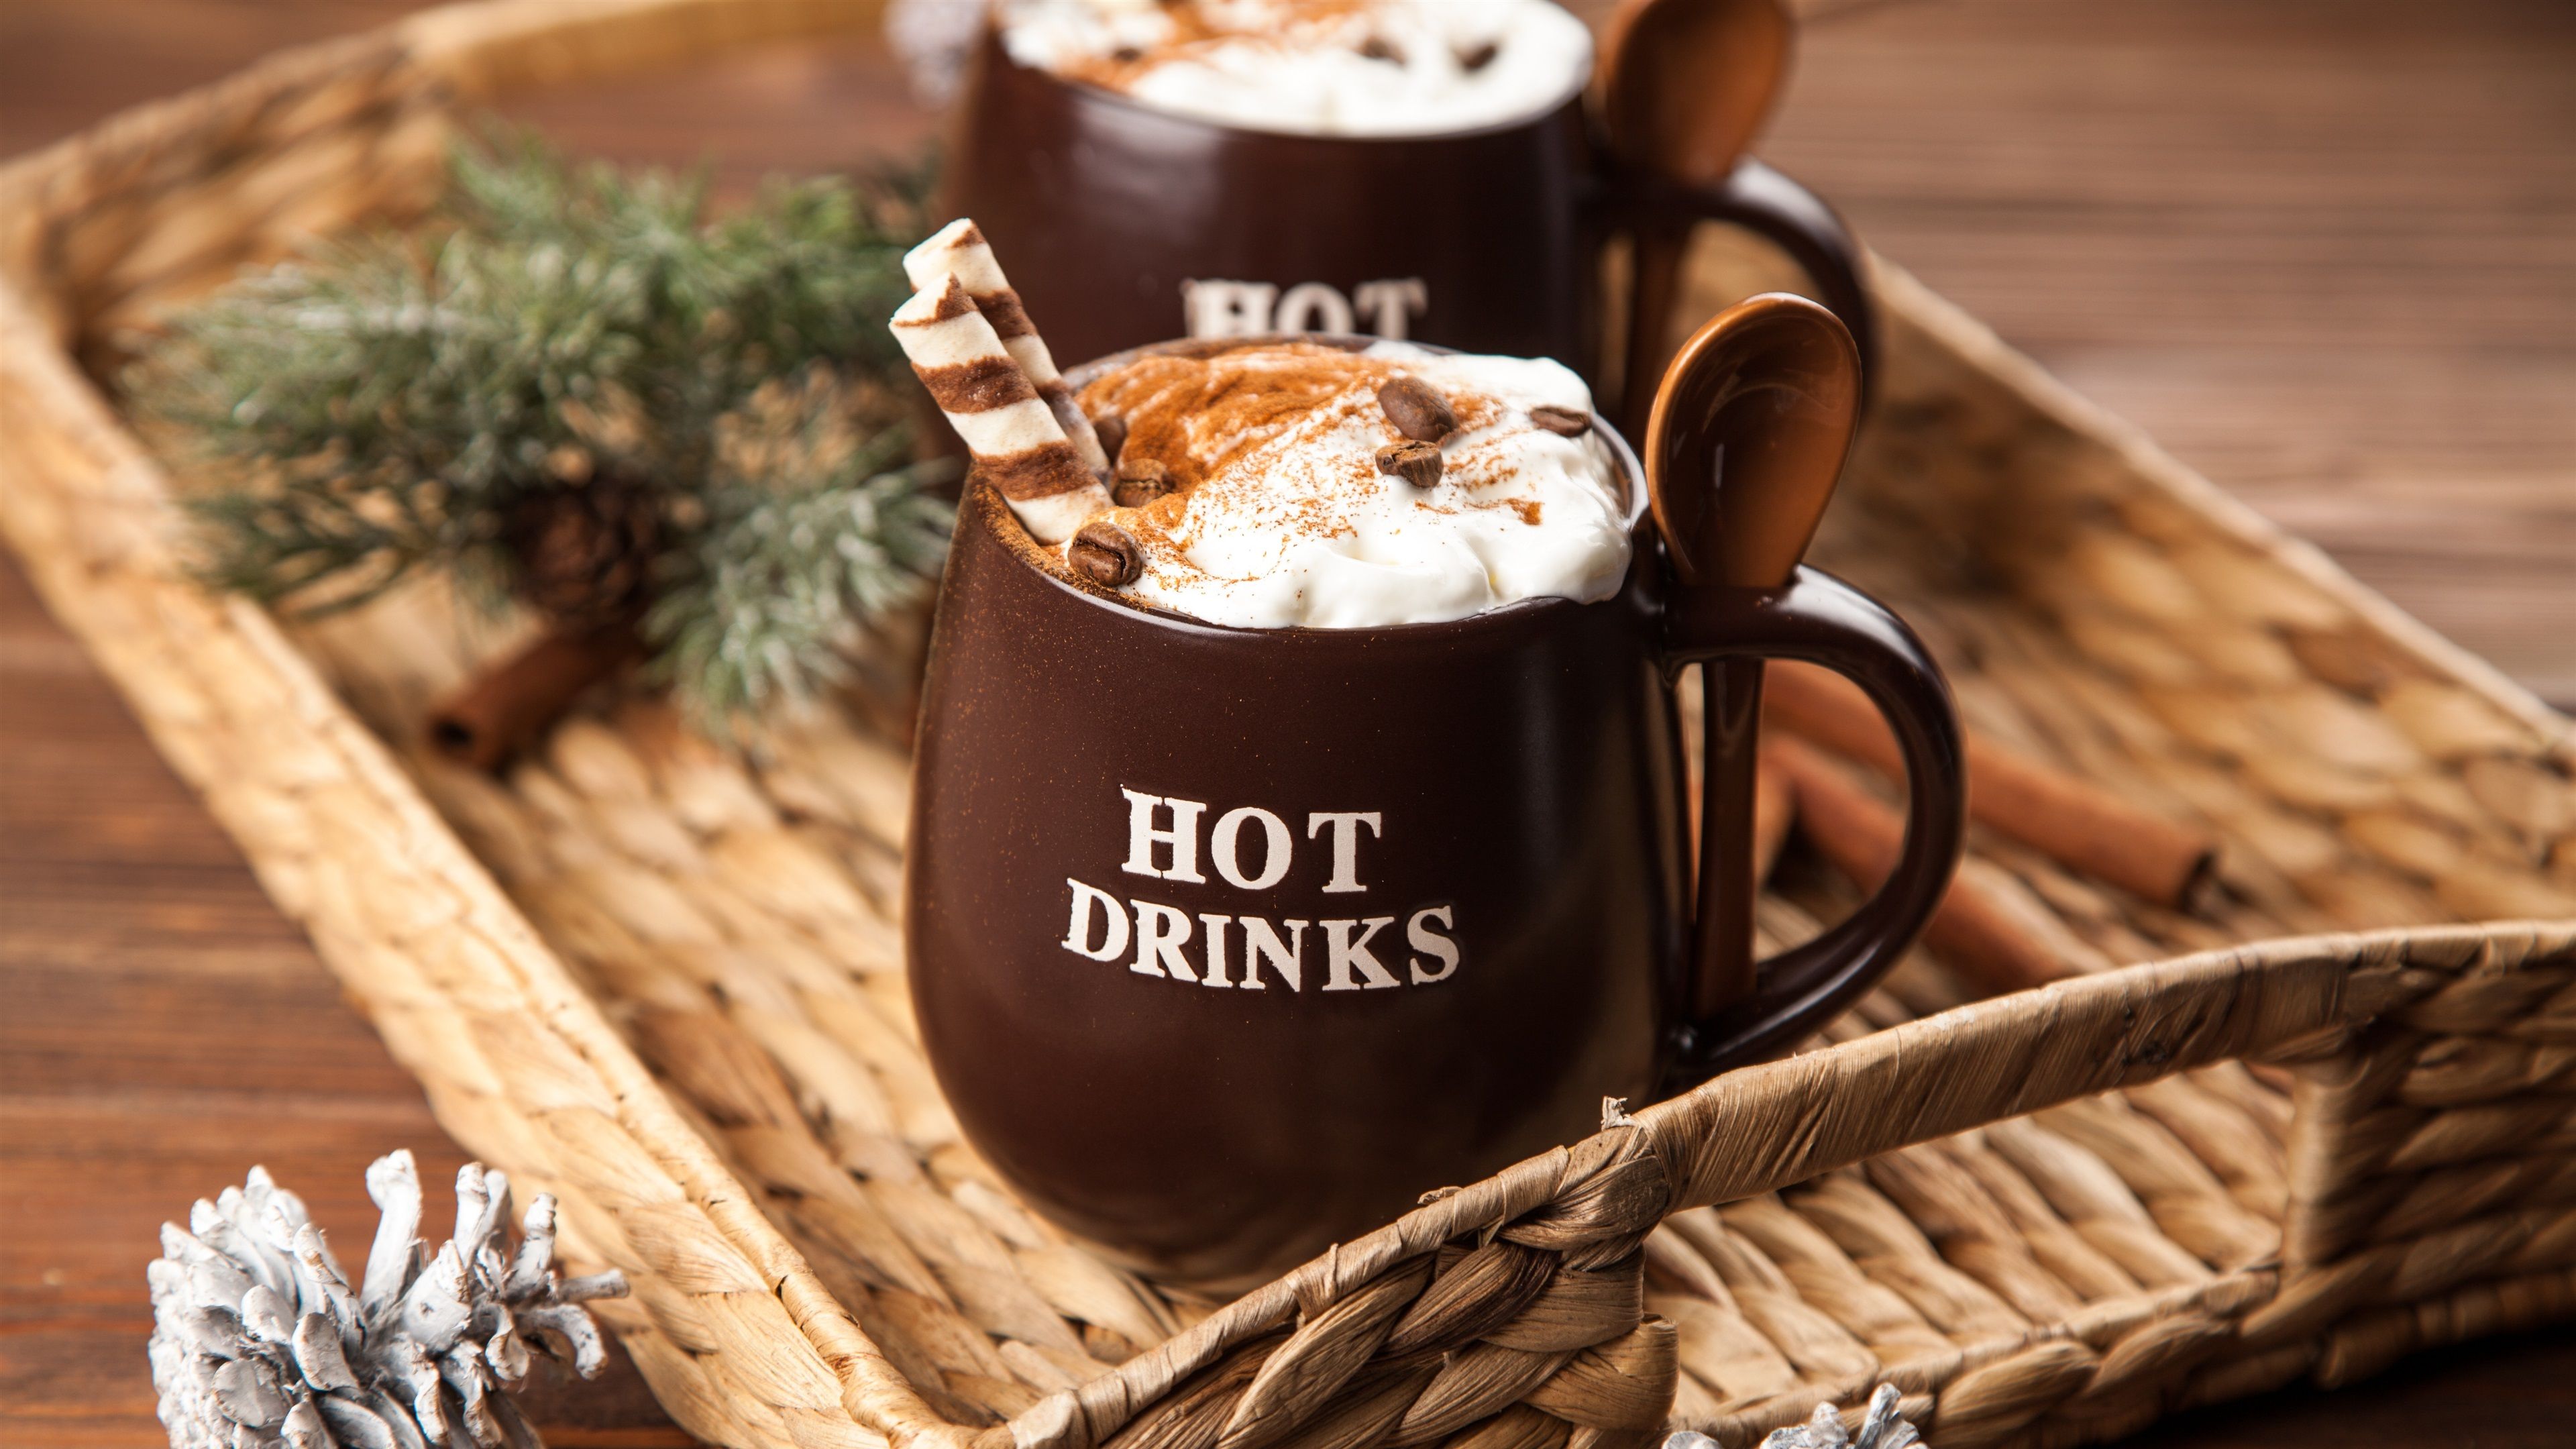 Wallpaper Hot drinks, coffee, cups 3840x2160 UHD 4K Picture, Image